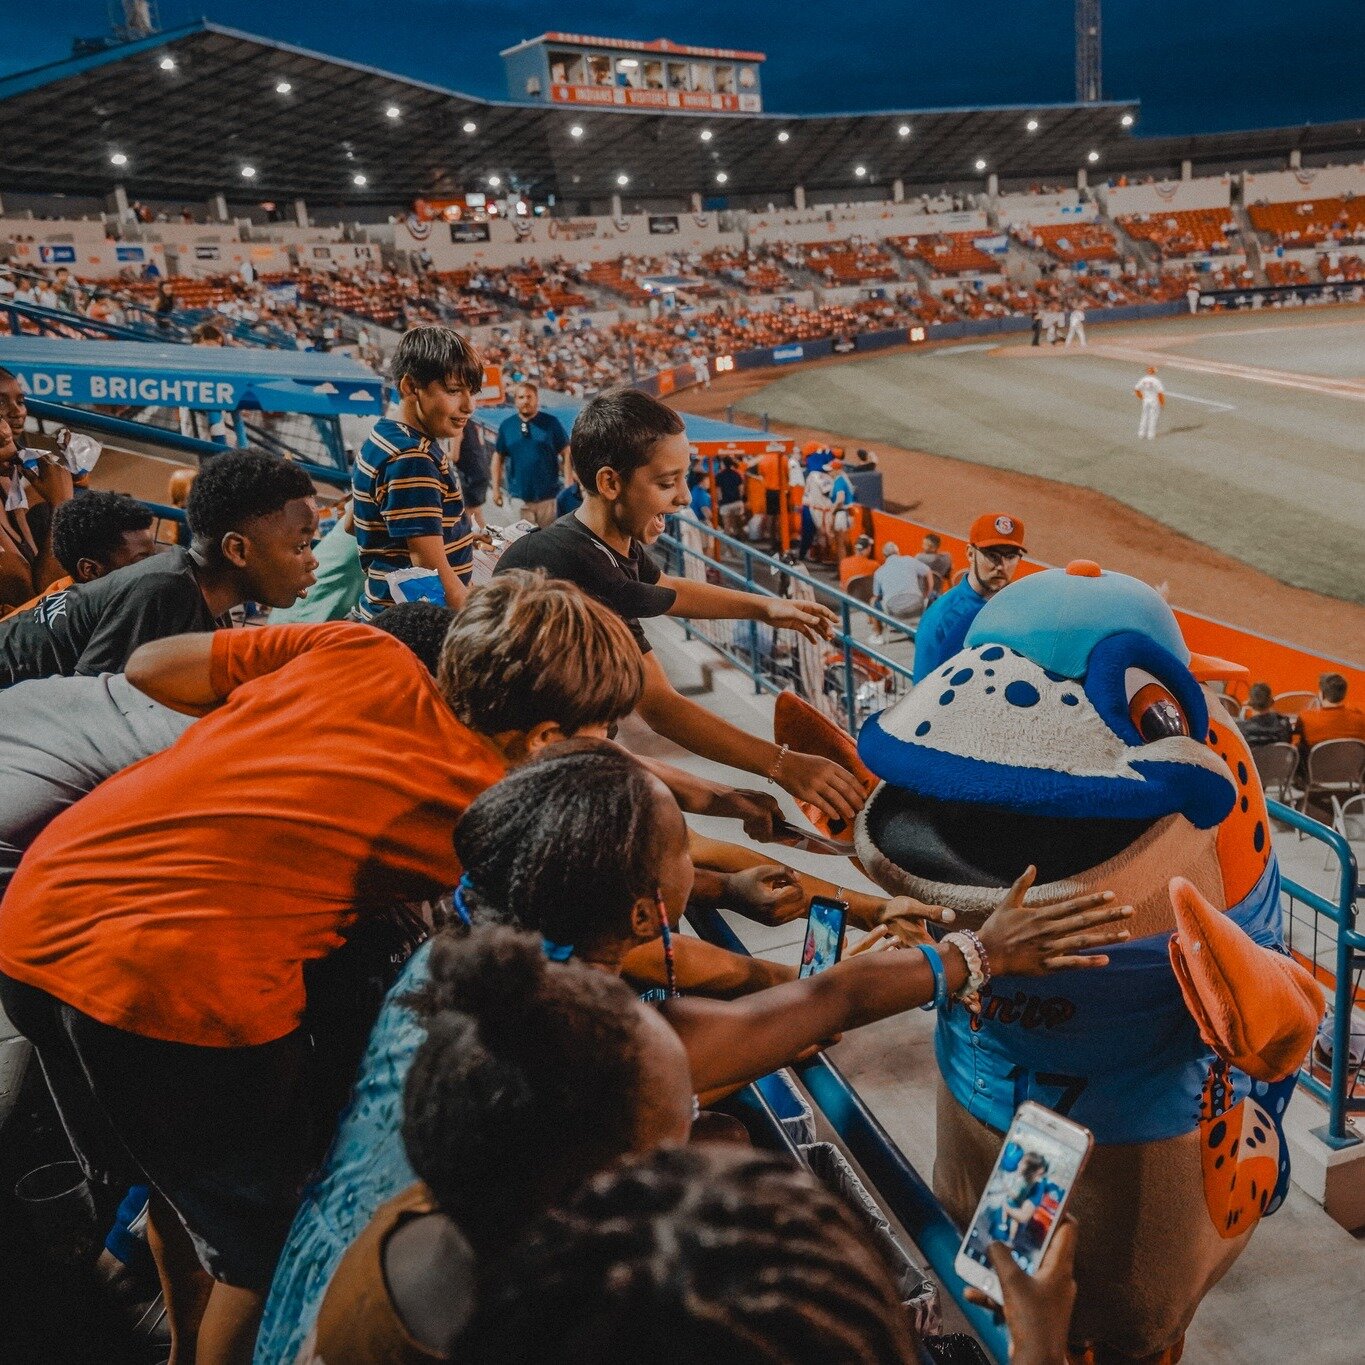 What a fun Thrive Night! ⚾️ Last night, Thrive supporters, staff, volunteers, and program participants gathered at Avista Stadium to cheer for the Spokane Indians. Special thanks to @spokaneindians and @chashealth for providing tickets for our reside